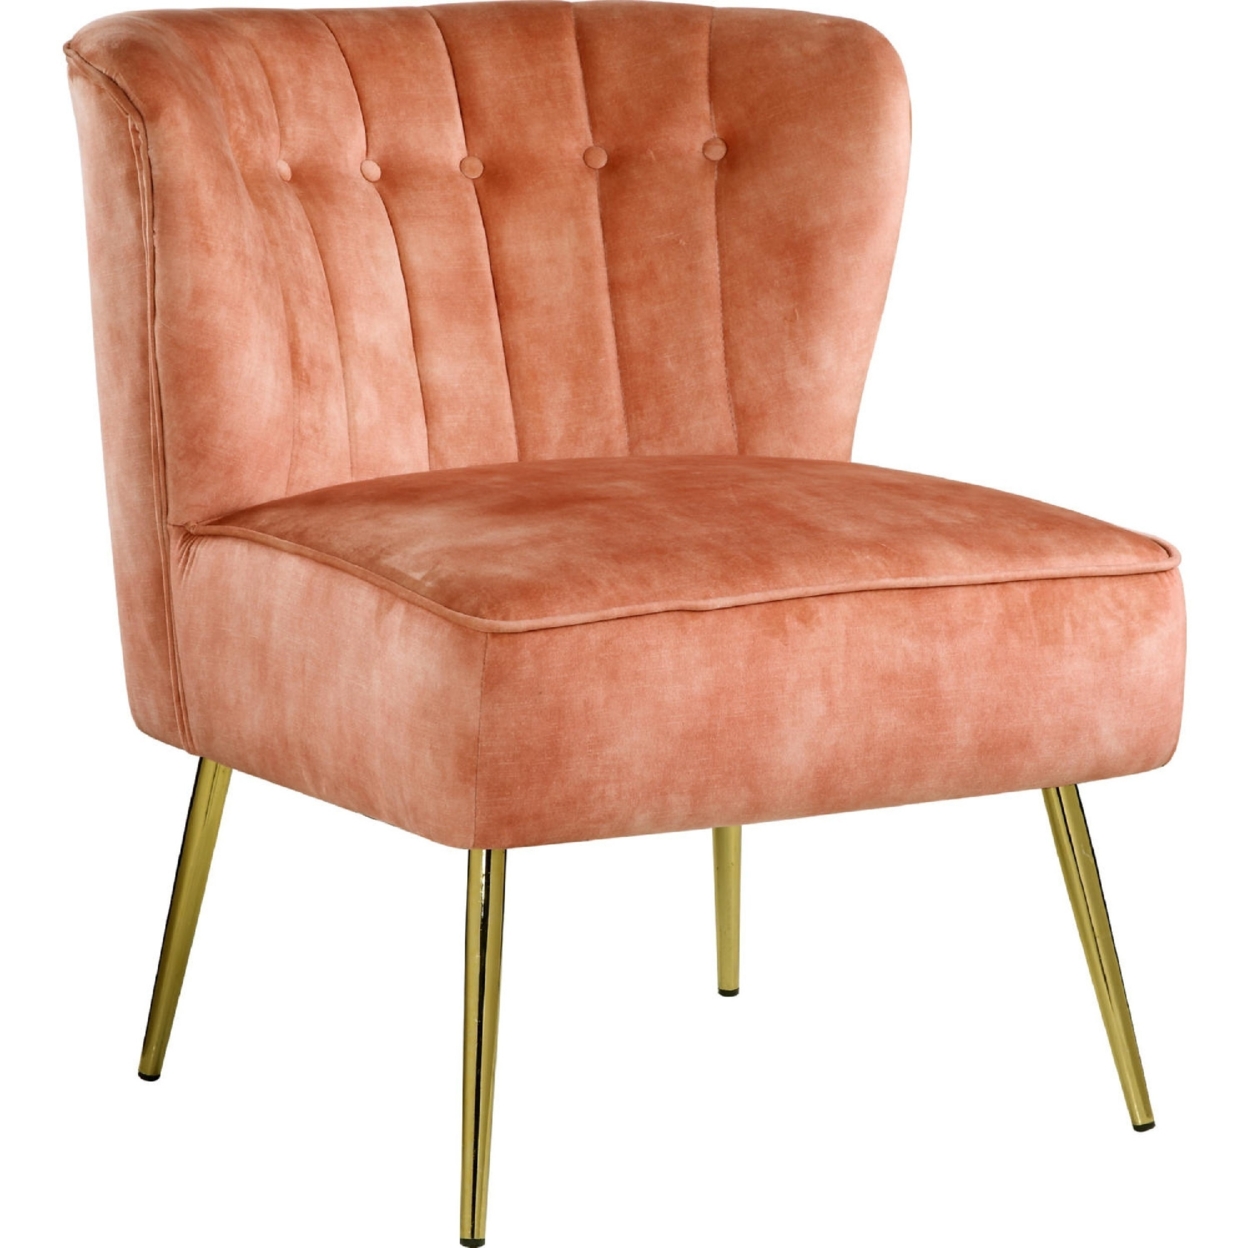 Accent Chair With Curved Tufted Back, Orange And Gold- Saltoro Sherpi